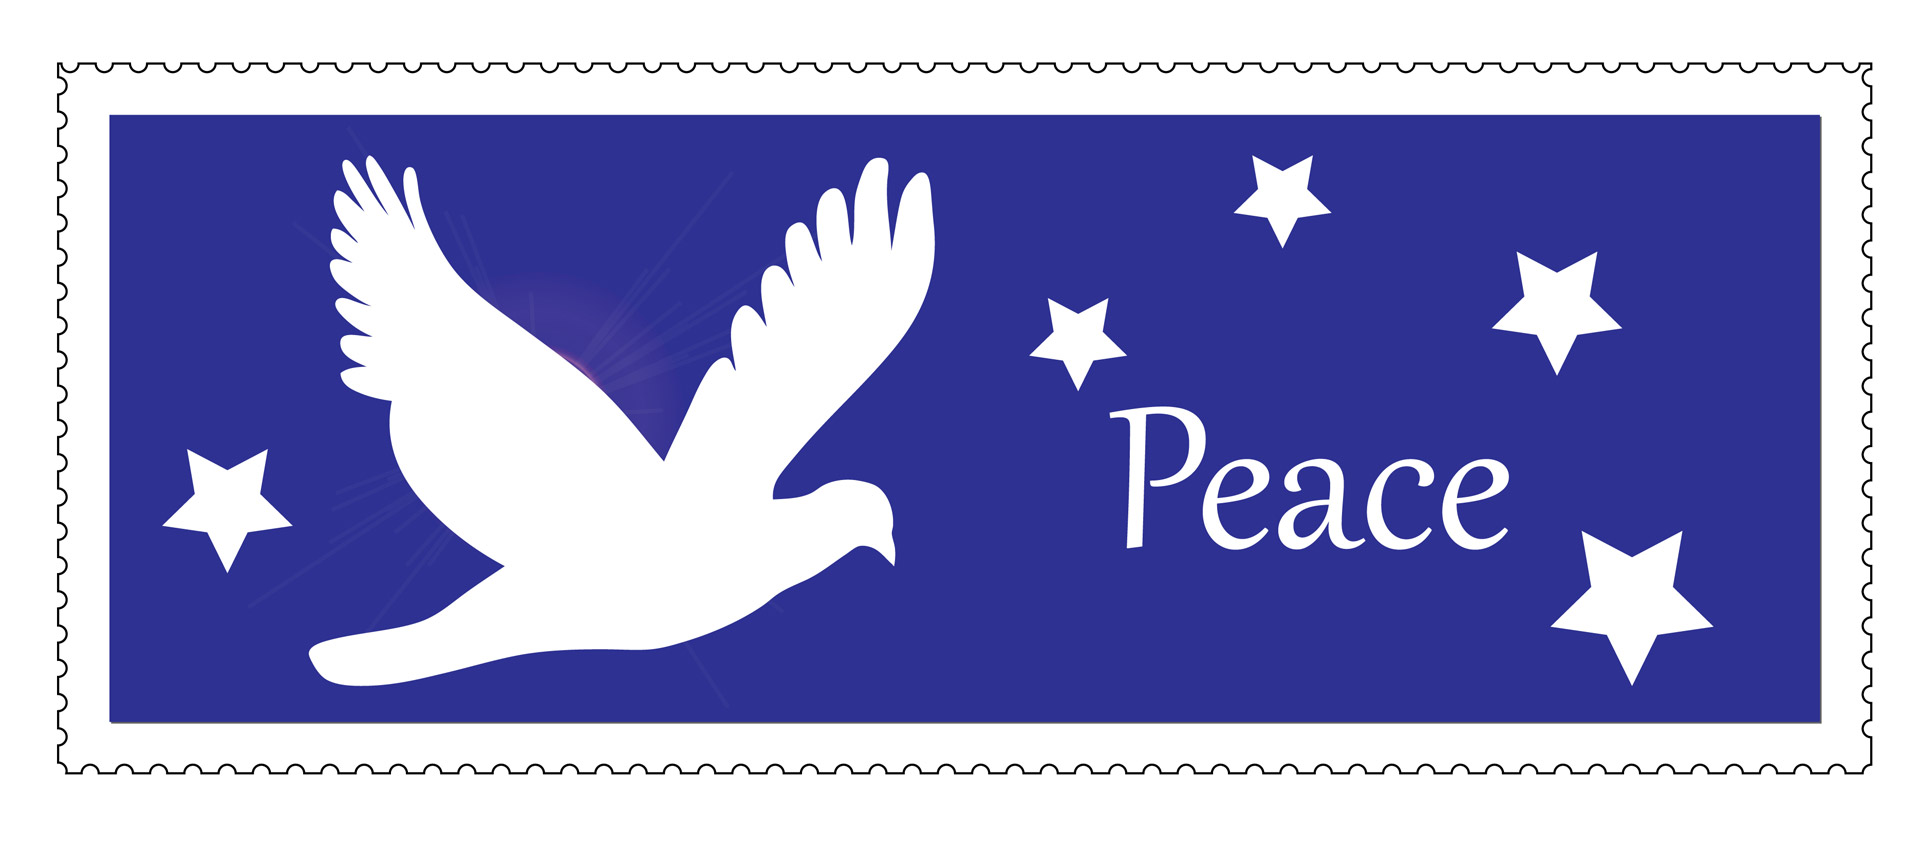 Cute christmas postage stamp of dove and stars